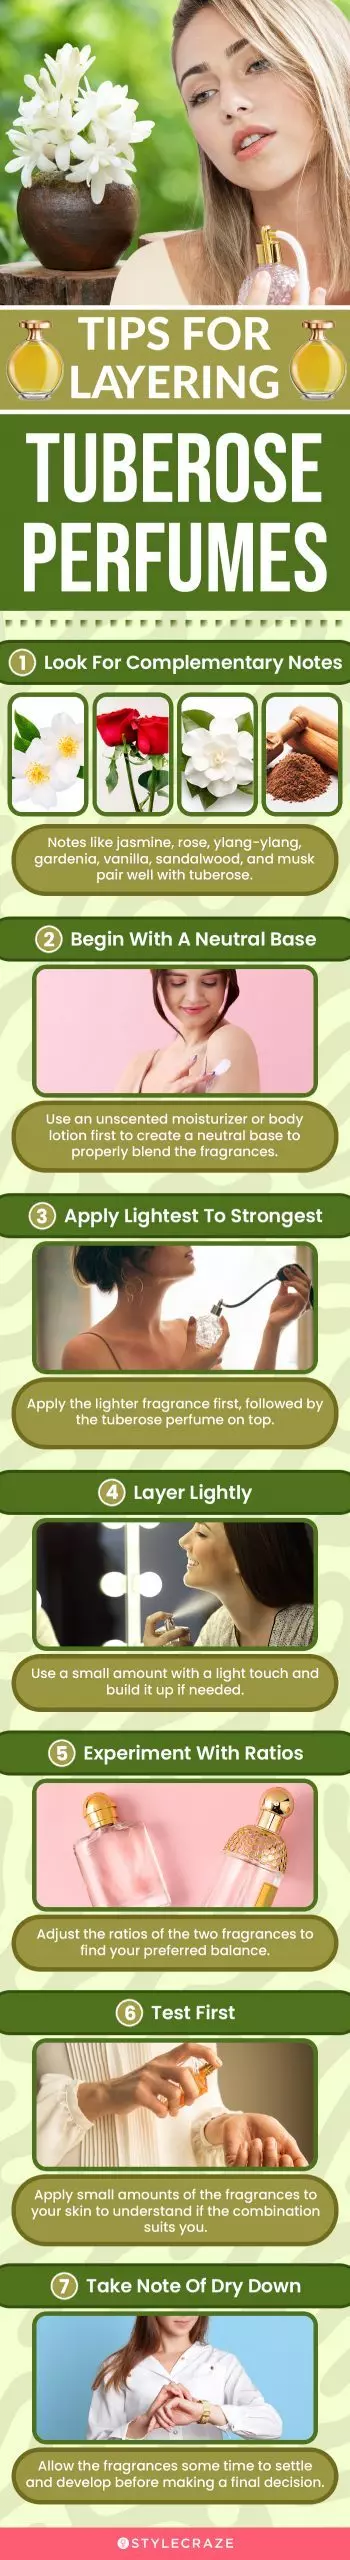 Tips For Layering Tuberose Perfumes (infographic)